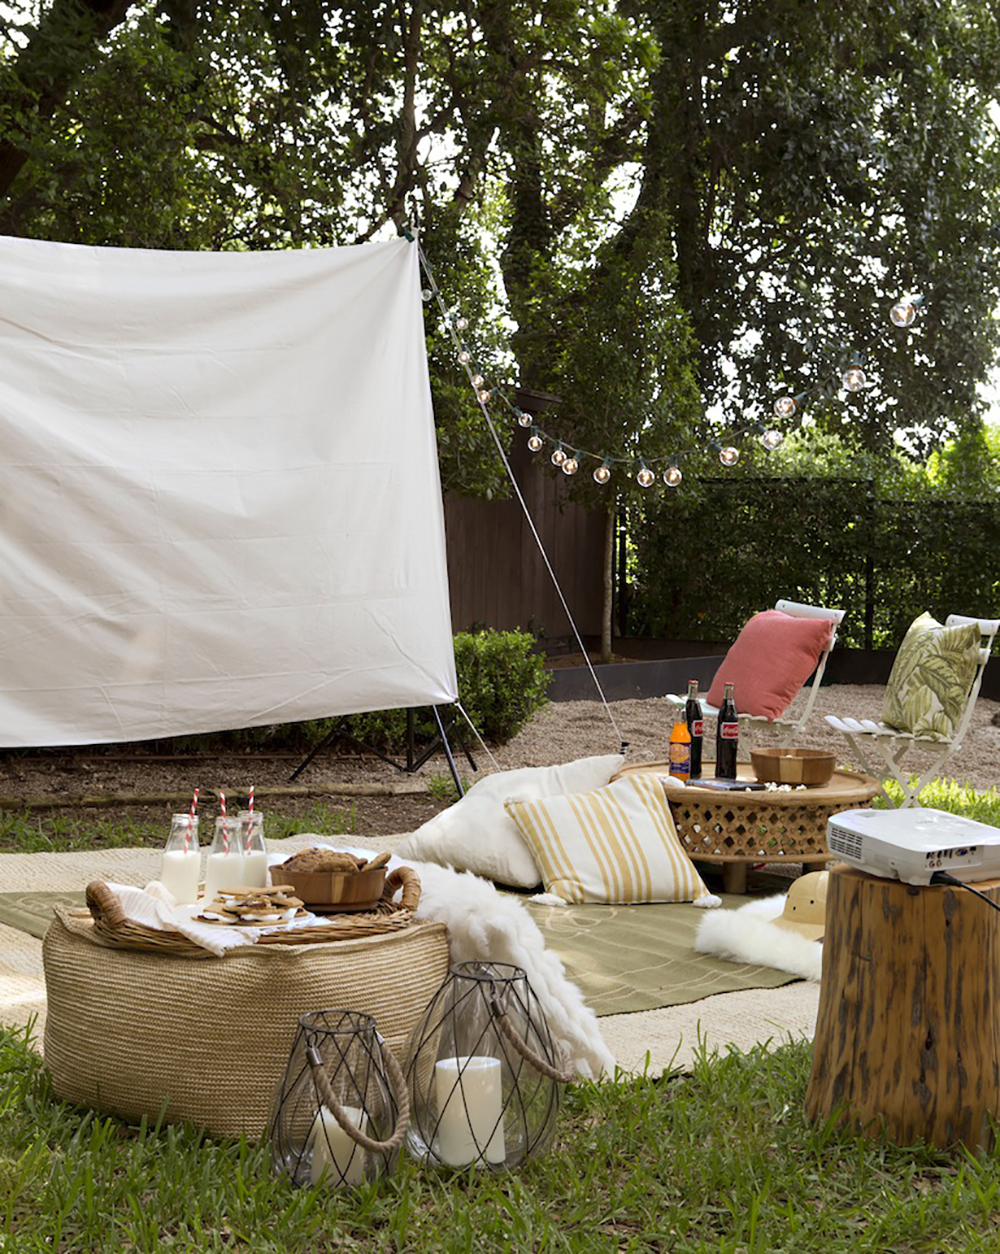 Host an outdoor movie night in your backyard.